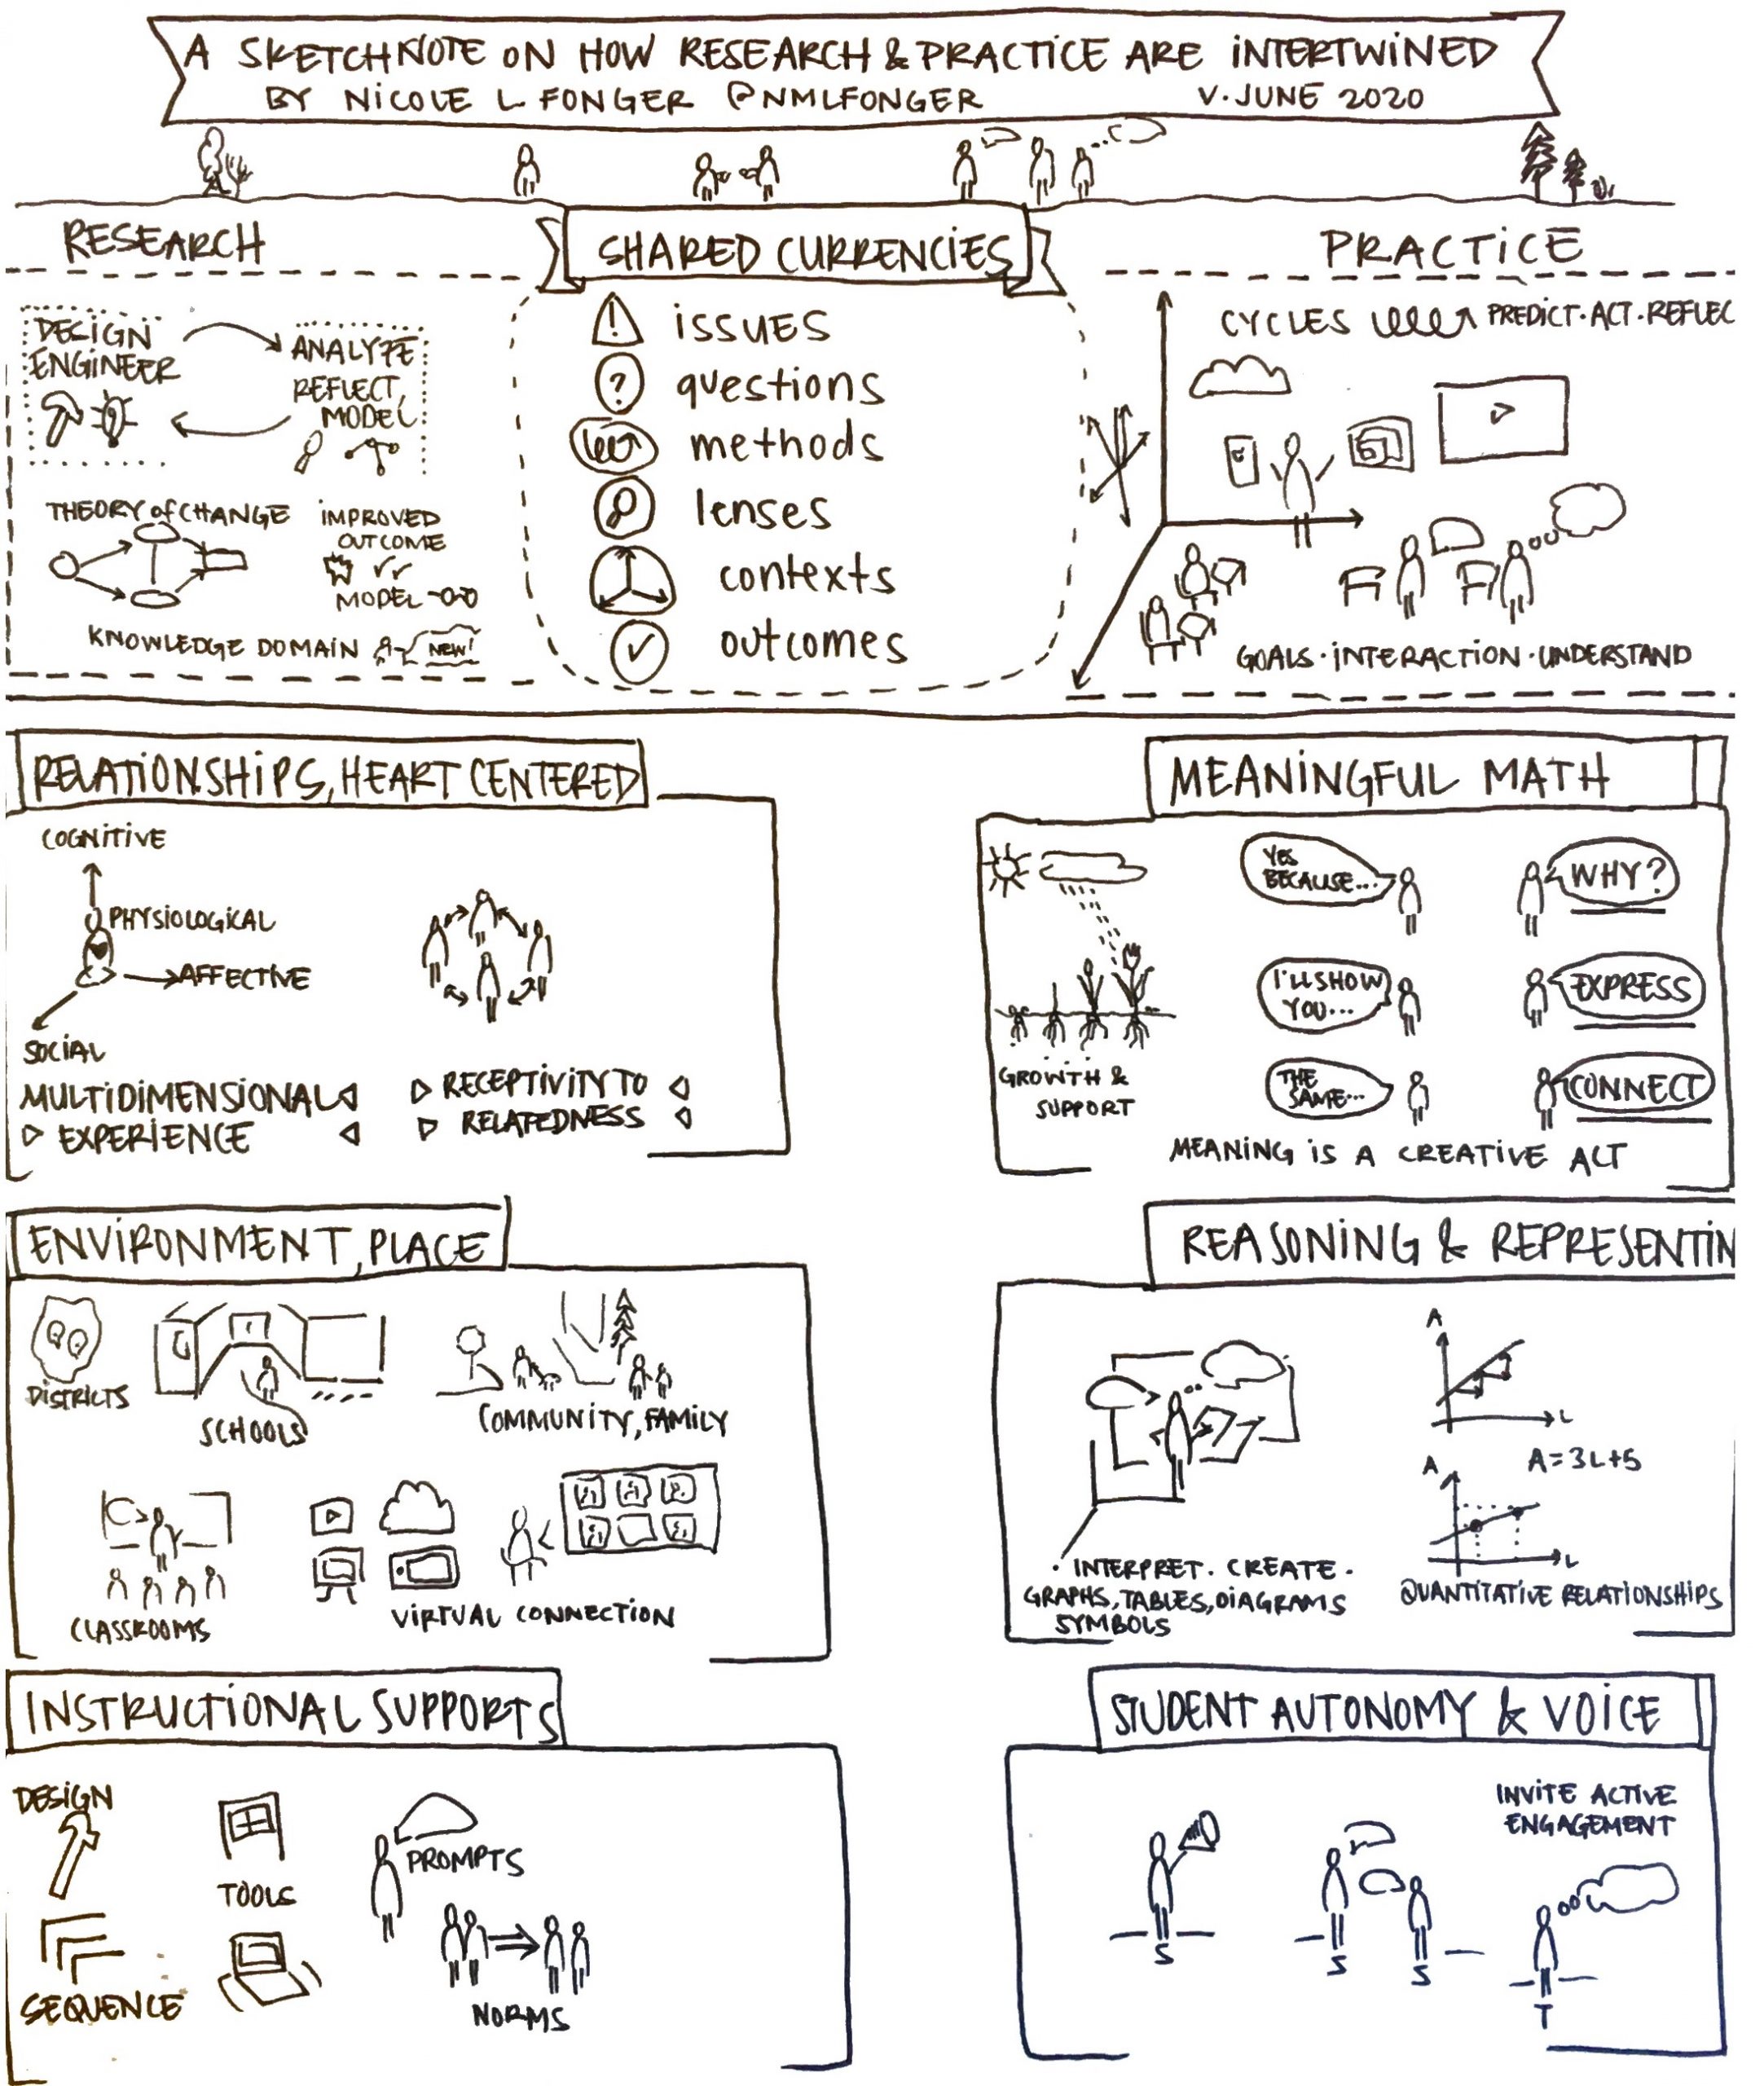 sketchnote by nicole fonger on how research and practice are intertwined